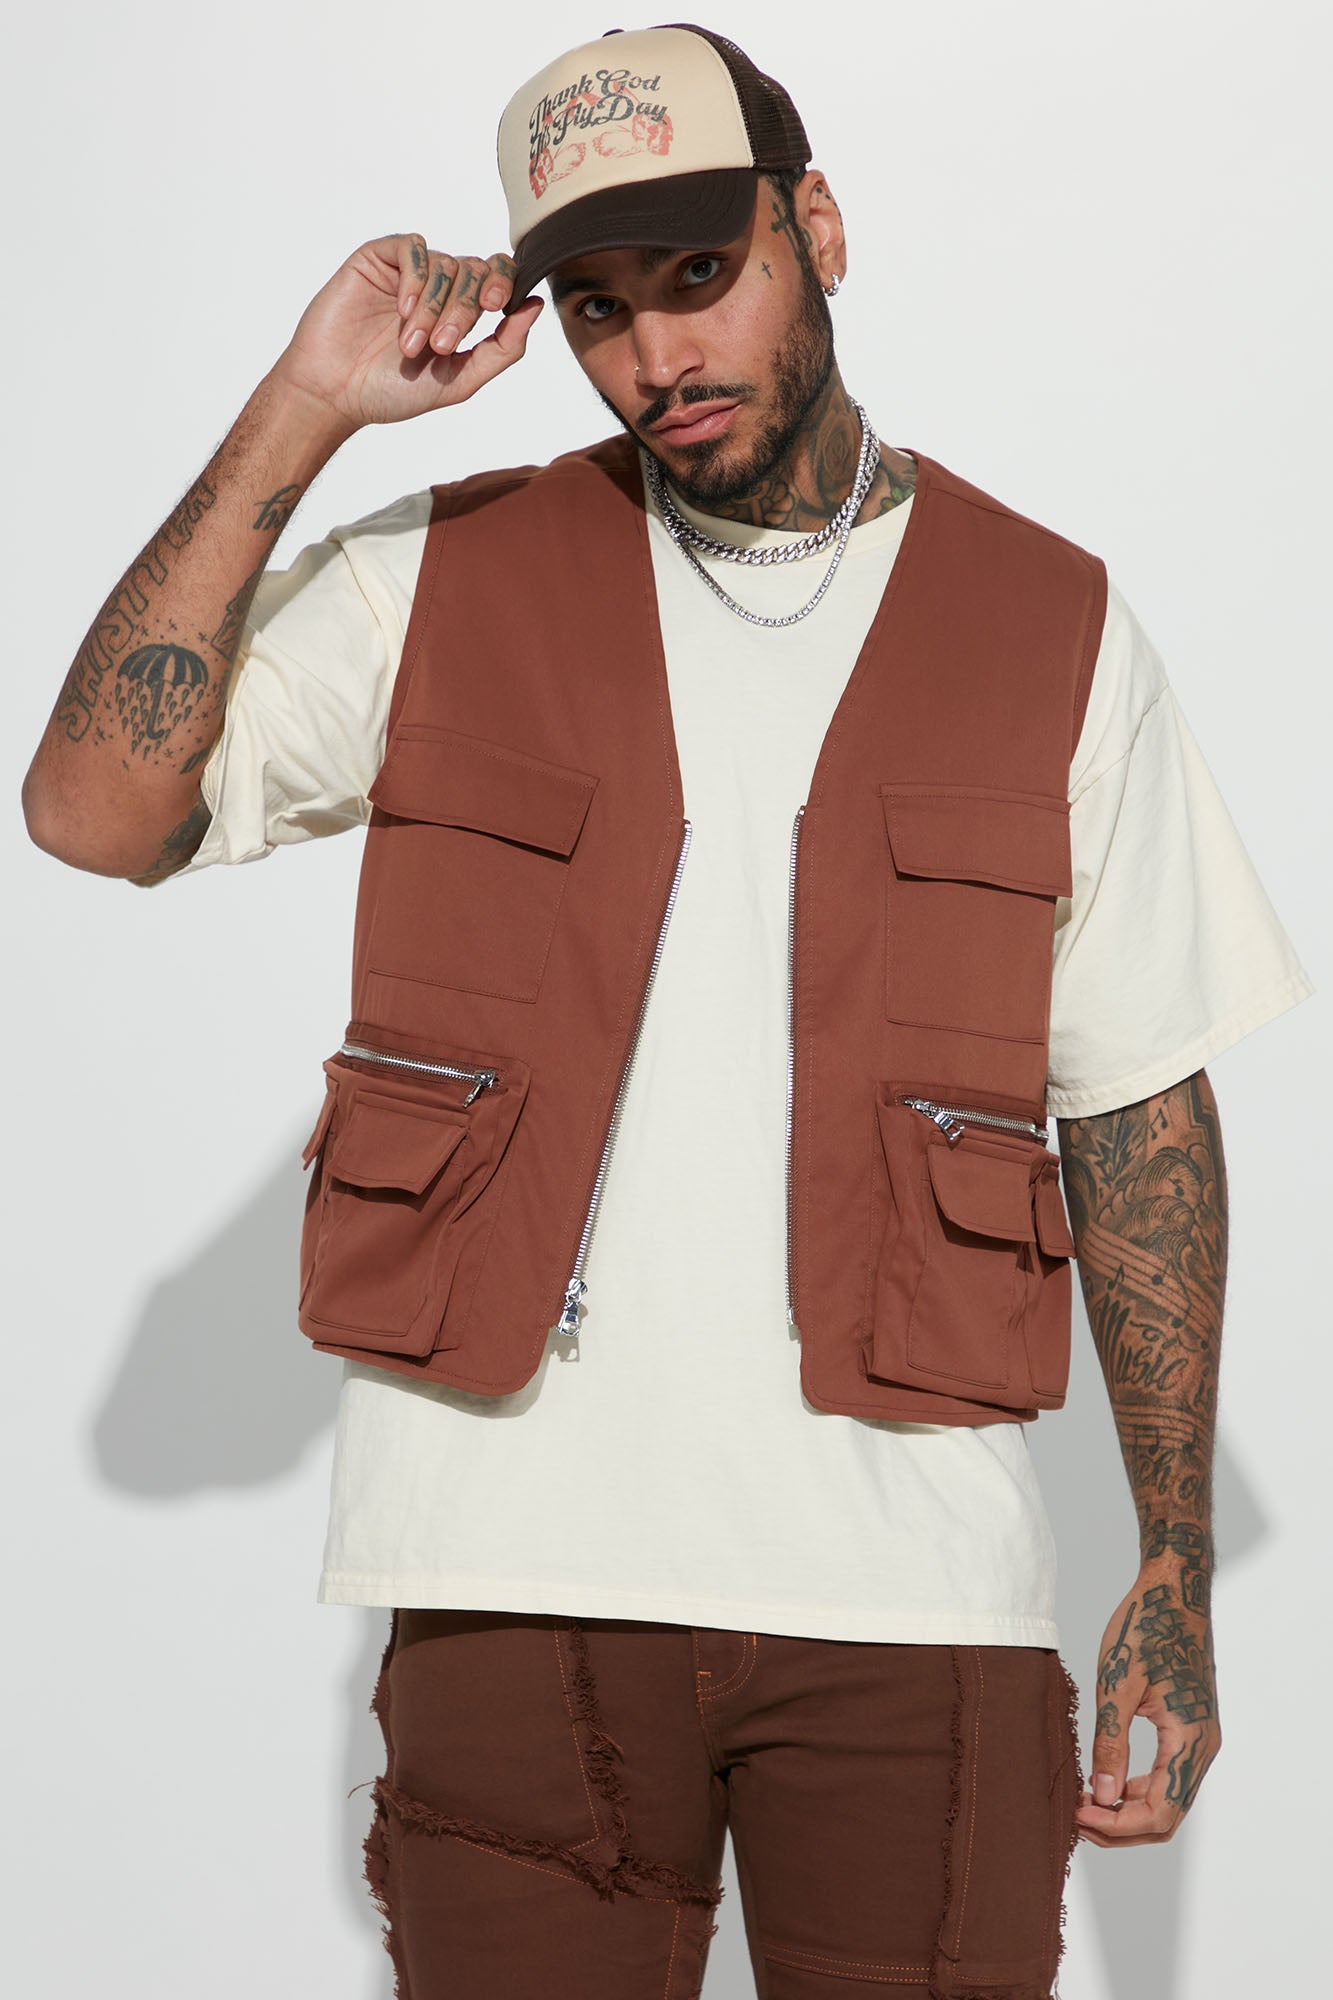 MAN Utility Vest With Rubber Branding